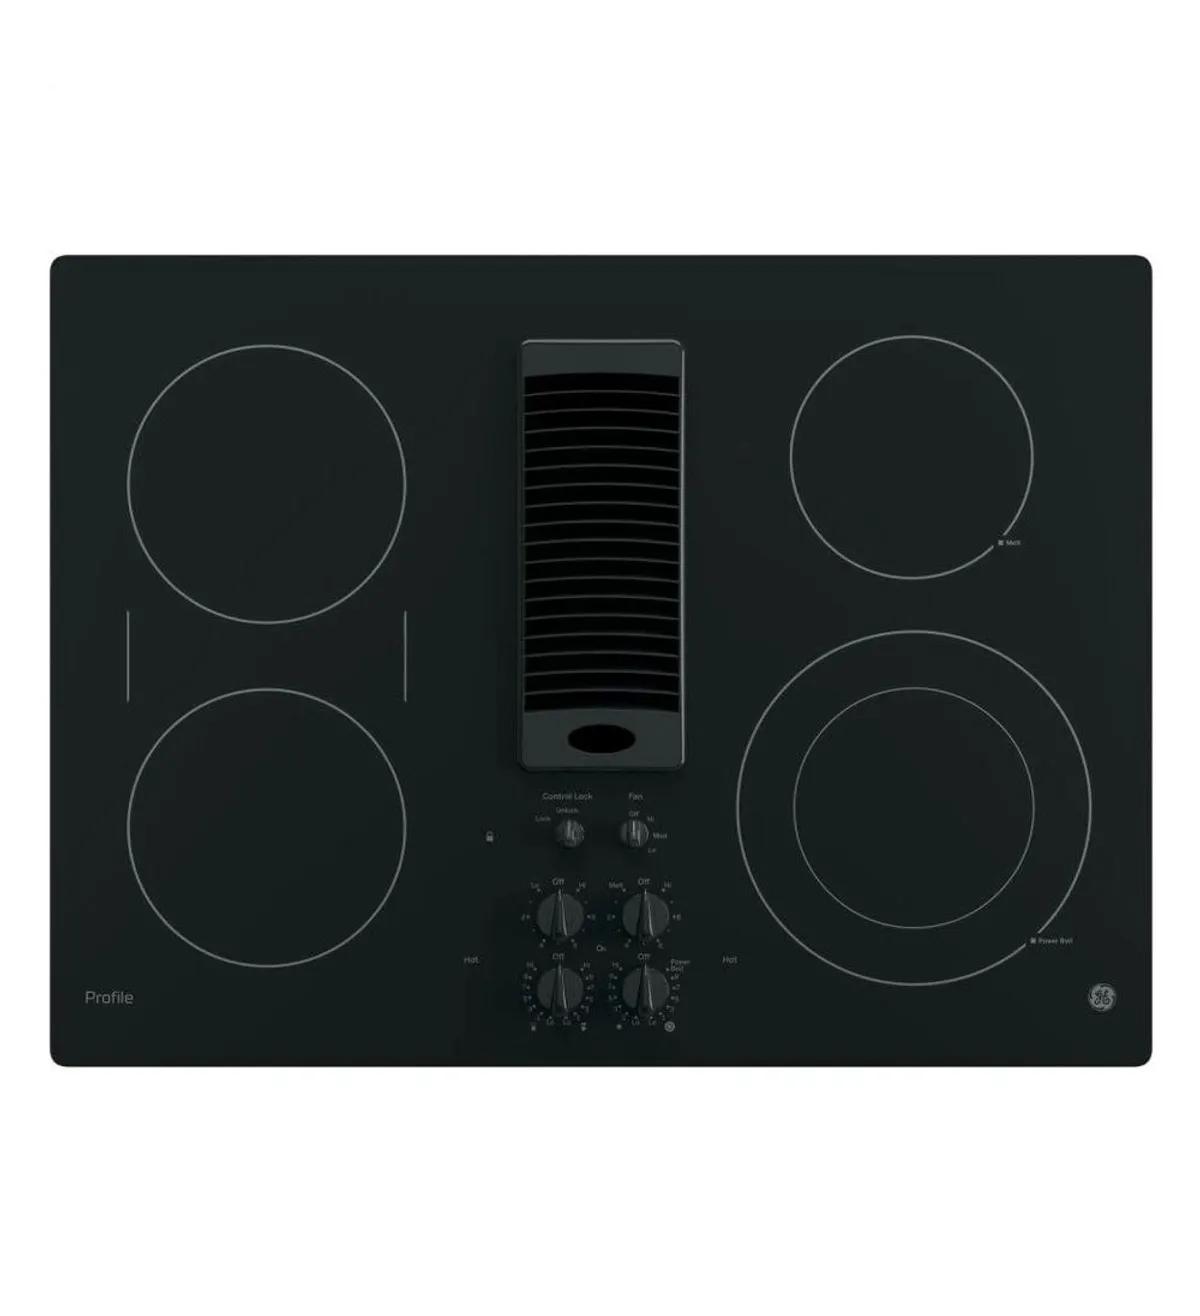 GE 30 Inch downdraft electric cooktop review